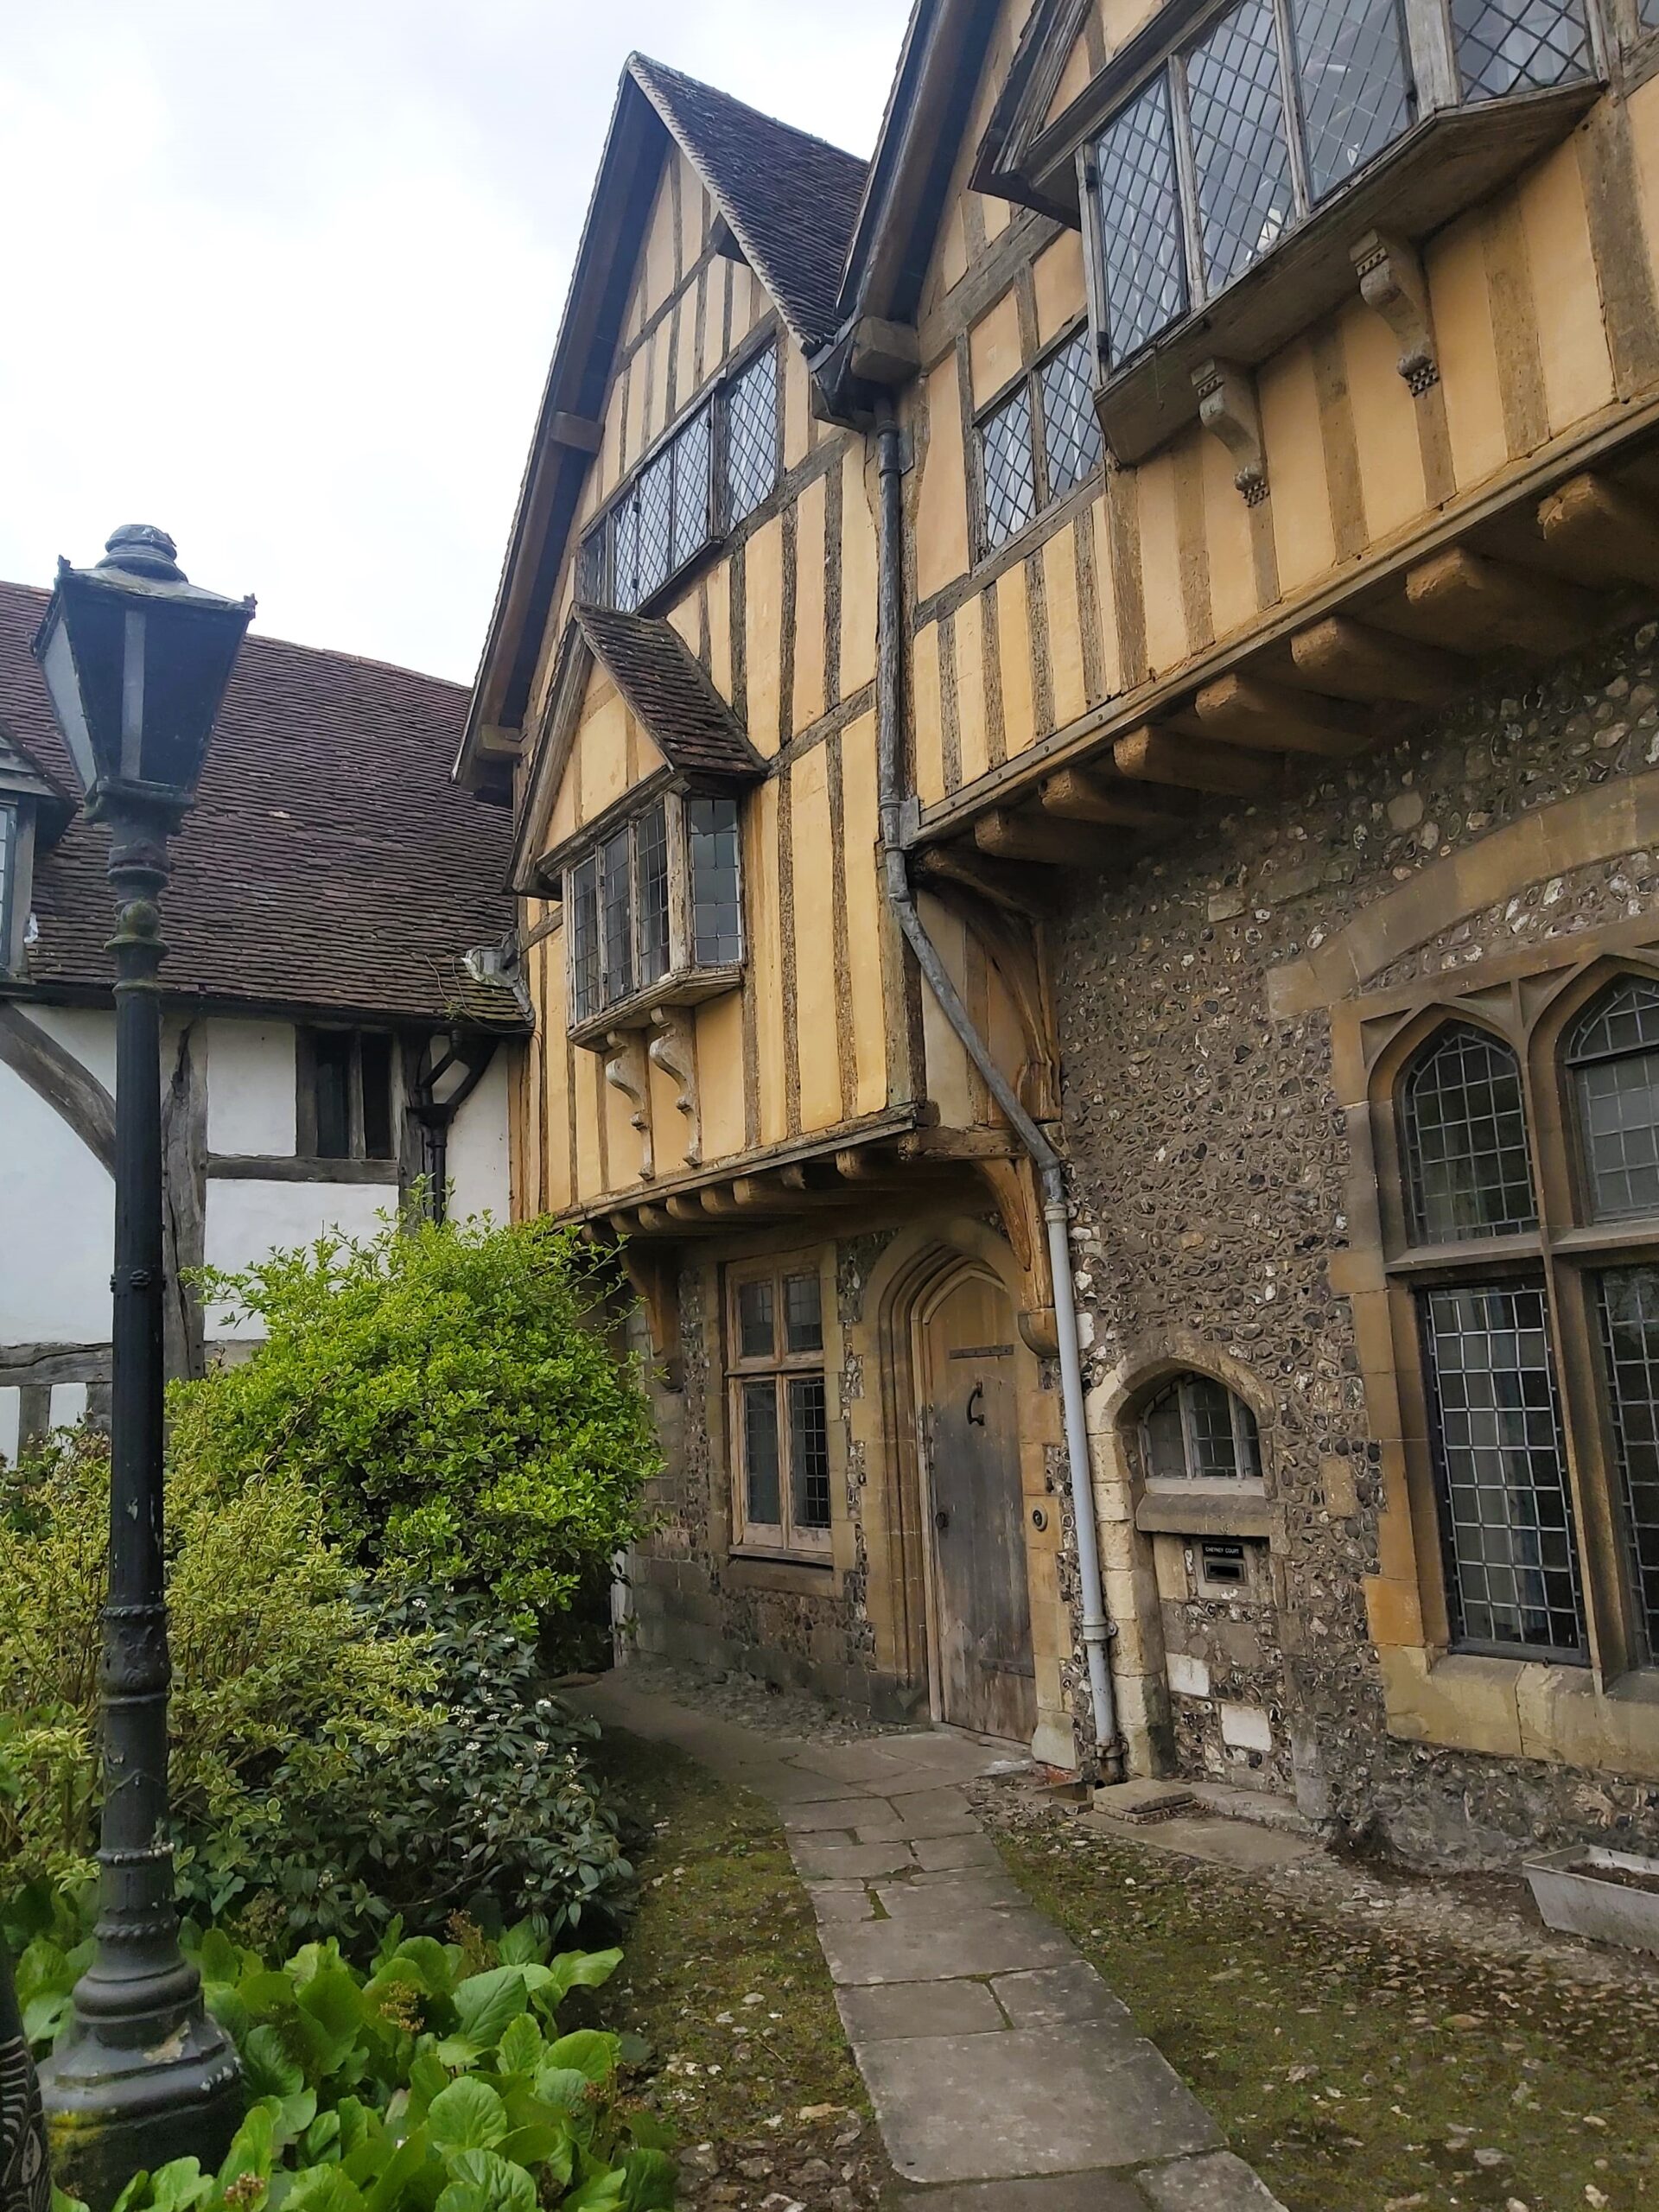 An old yellow, timber and stone building in Winchester, England